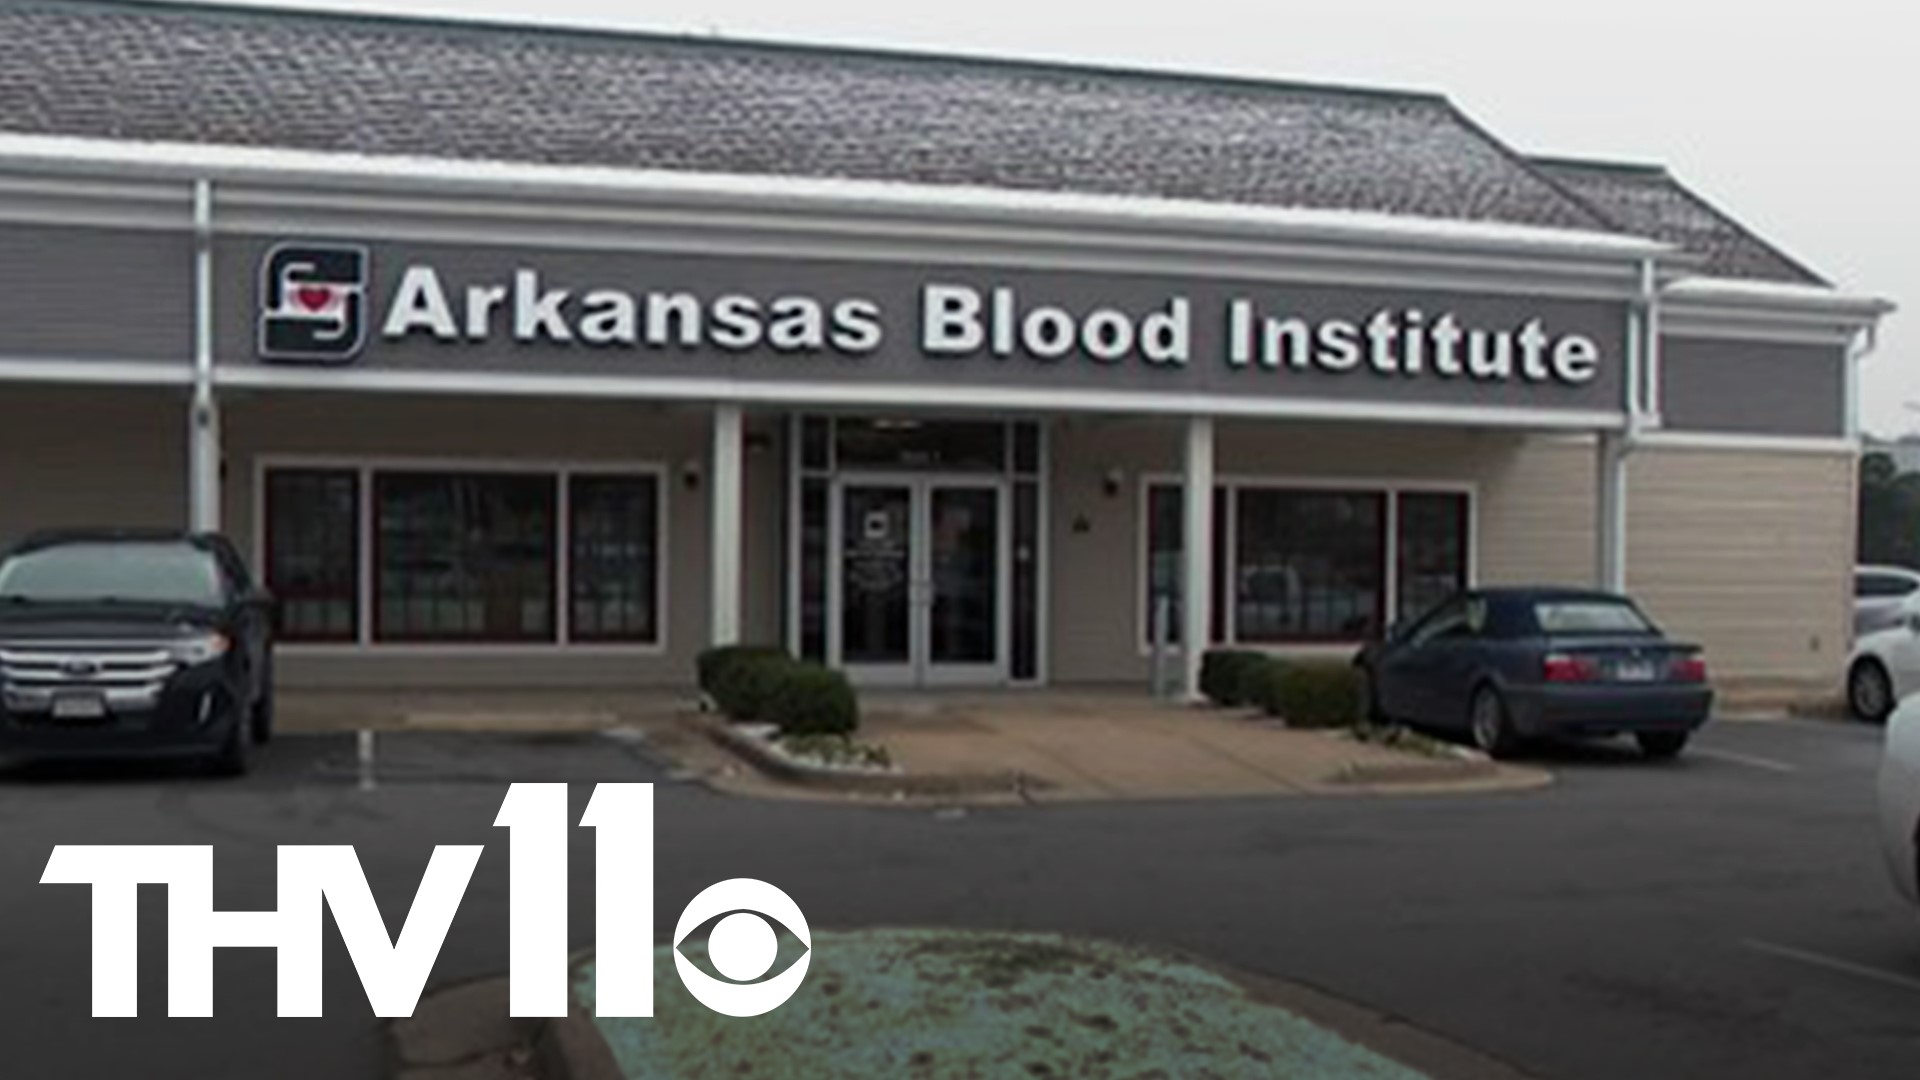 While omicron continues to spread in our state, the Arkansas Blood Institute is expanding its COVID-19 antibody testing.